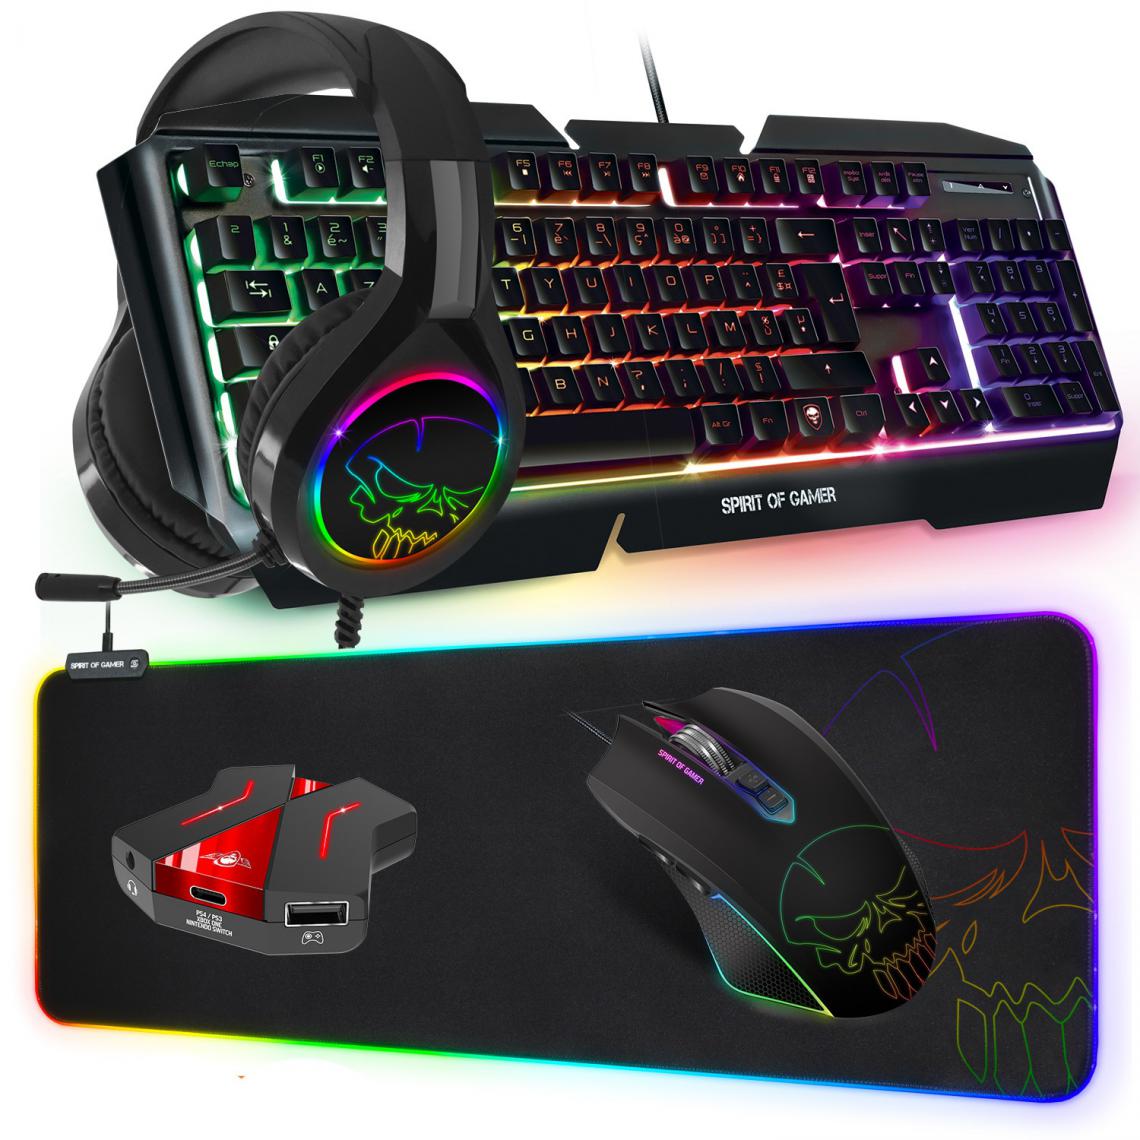 Spirit Of Gamers - Pack pro gamer FULL RGB Clavier, souris, tapis et casque - Compatible PC / PS4 /Xbox one / Xbox series S | X - Pack Clavier Souris